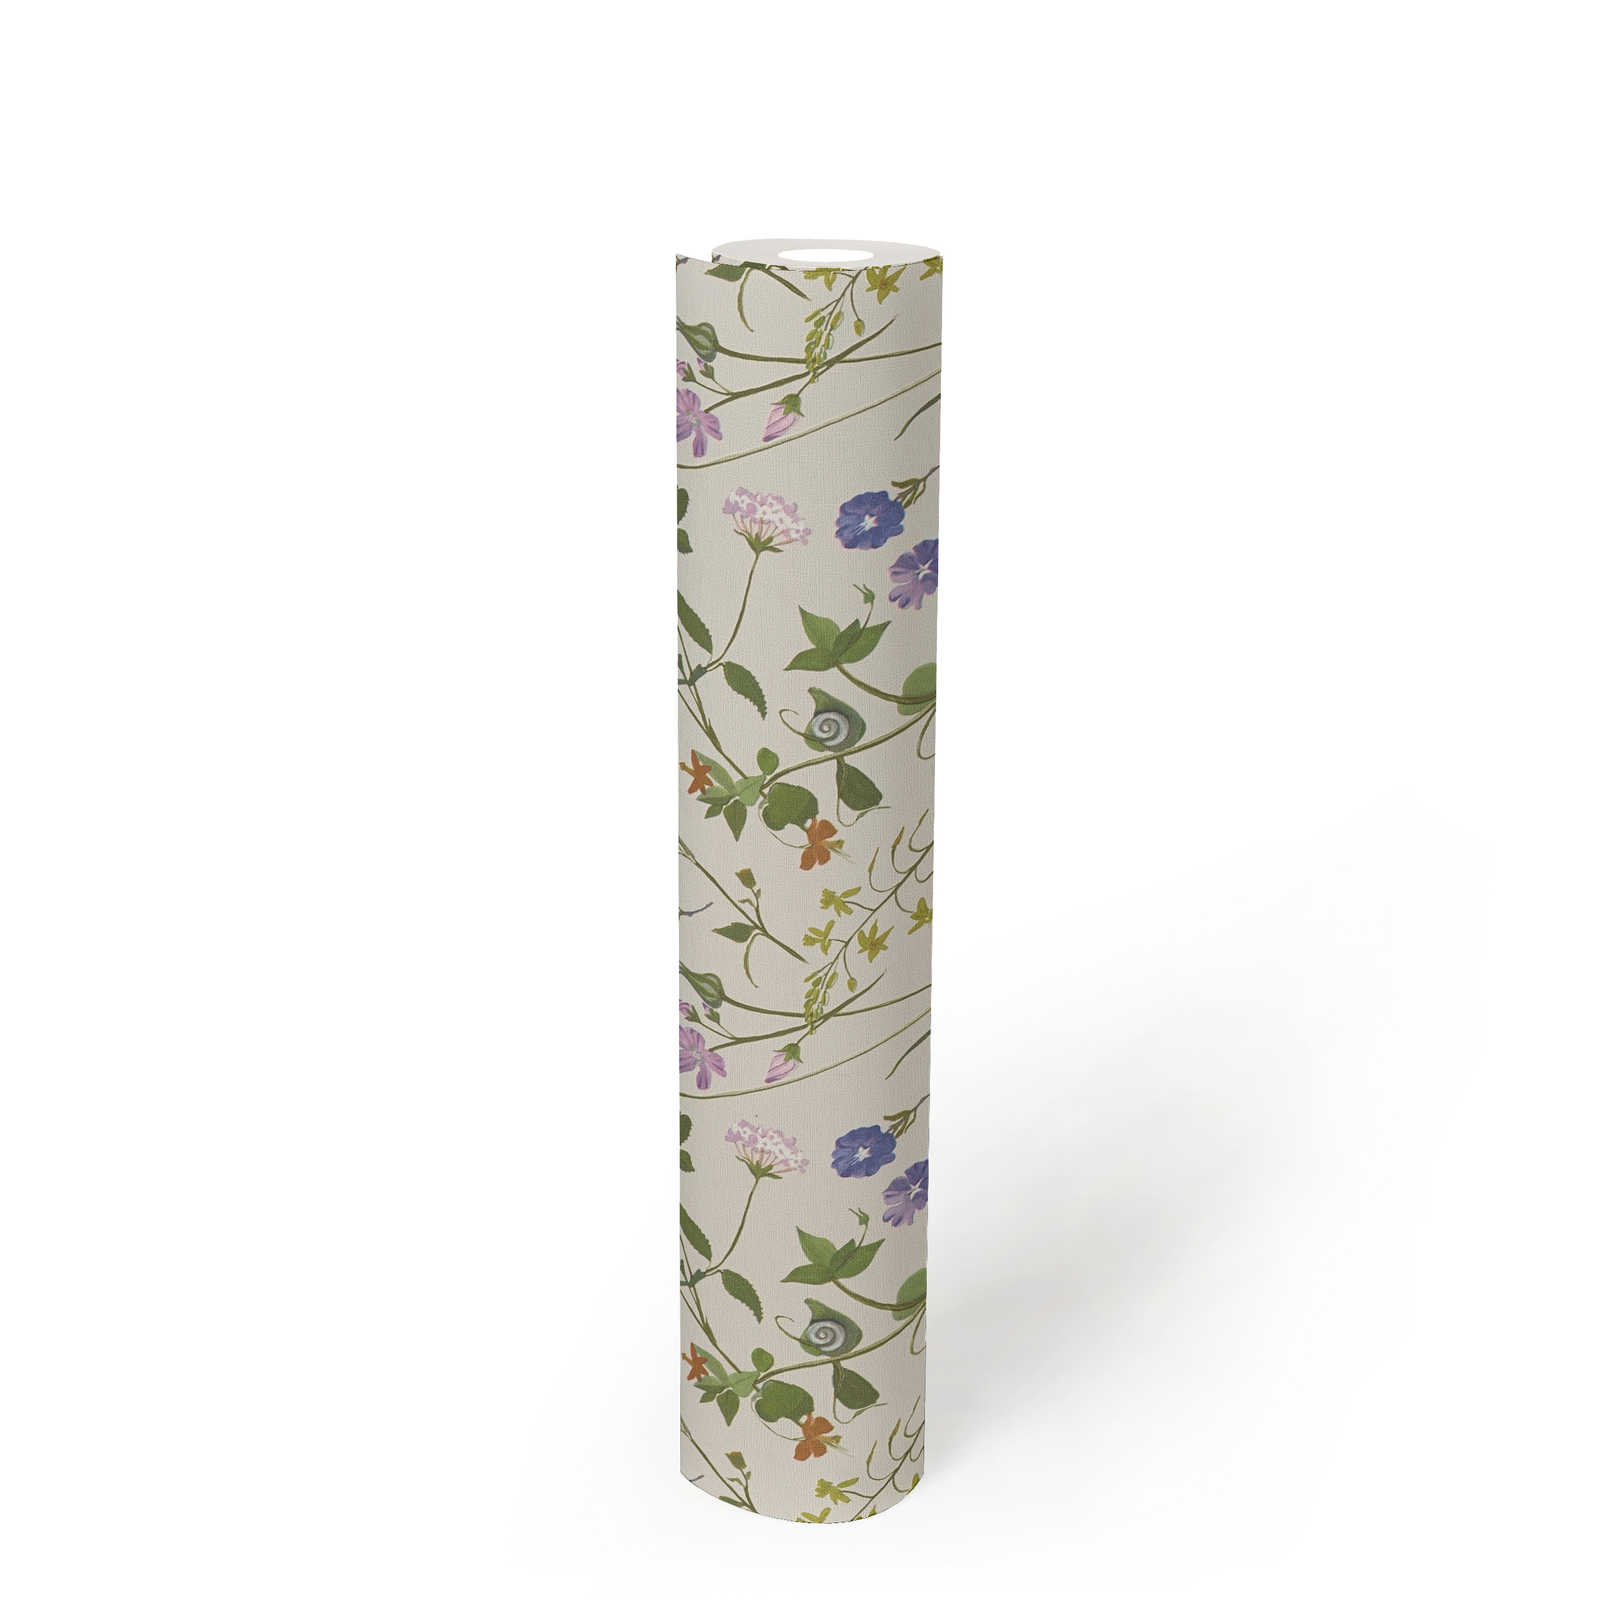             Non-woven wallpaper with various flowers & leaves - cream, green, colourful
        